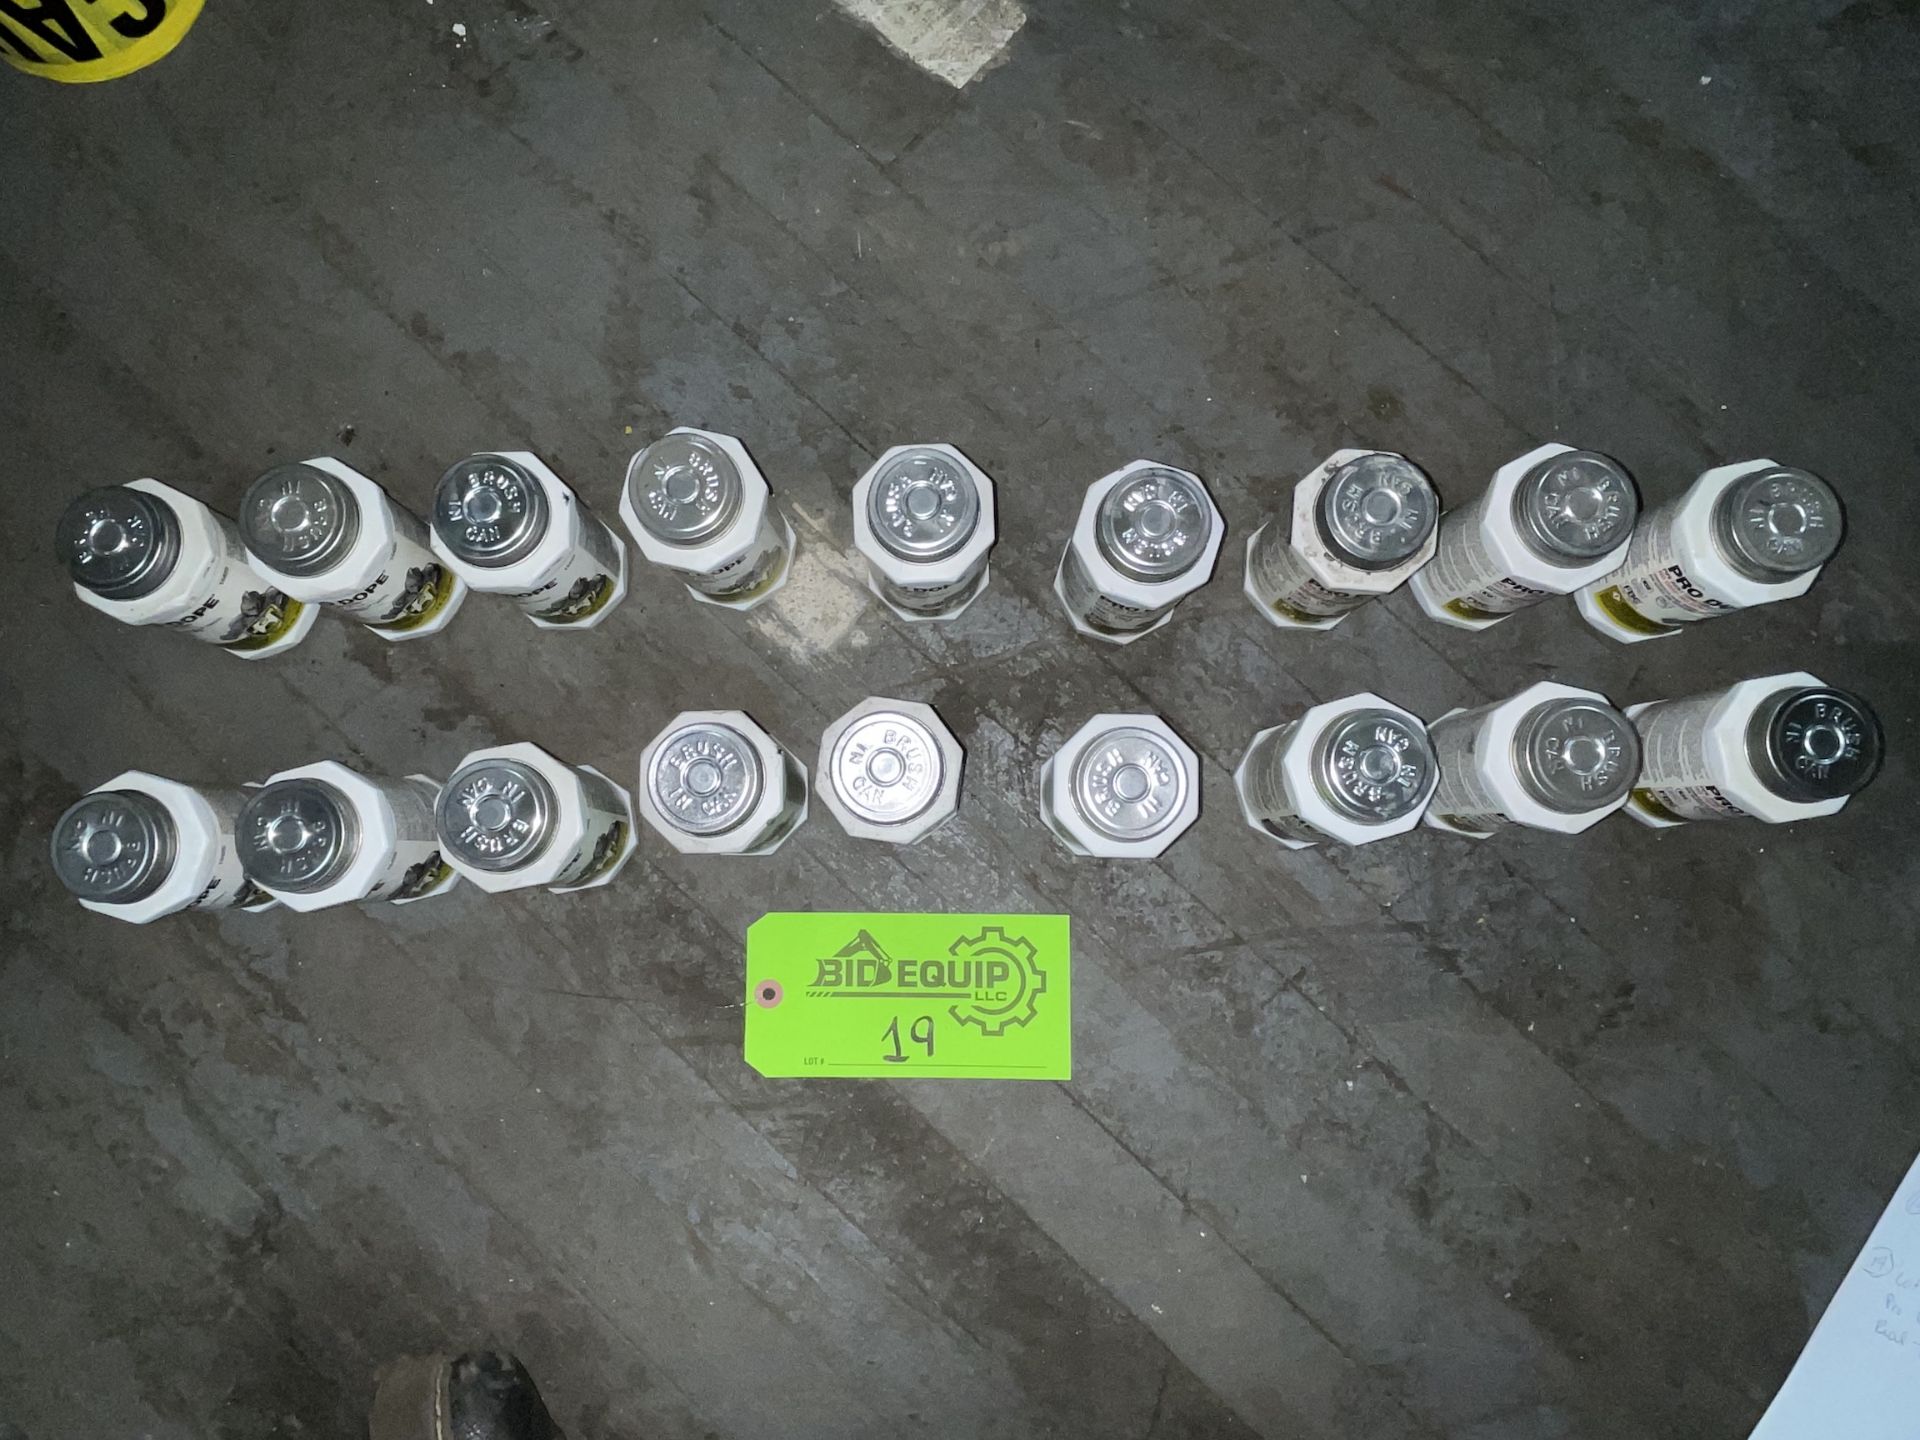 Lot of 18 Pipe Joint Compound Bottles - Upland - Image 2 of 6